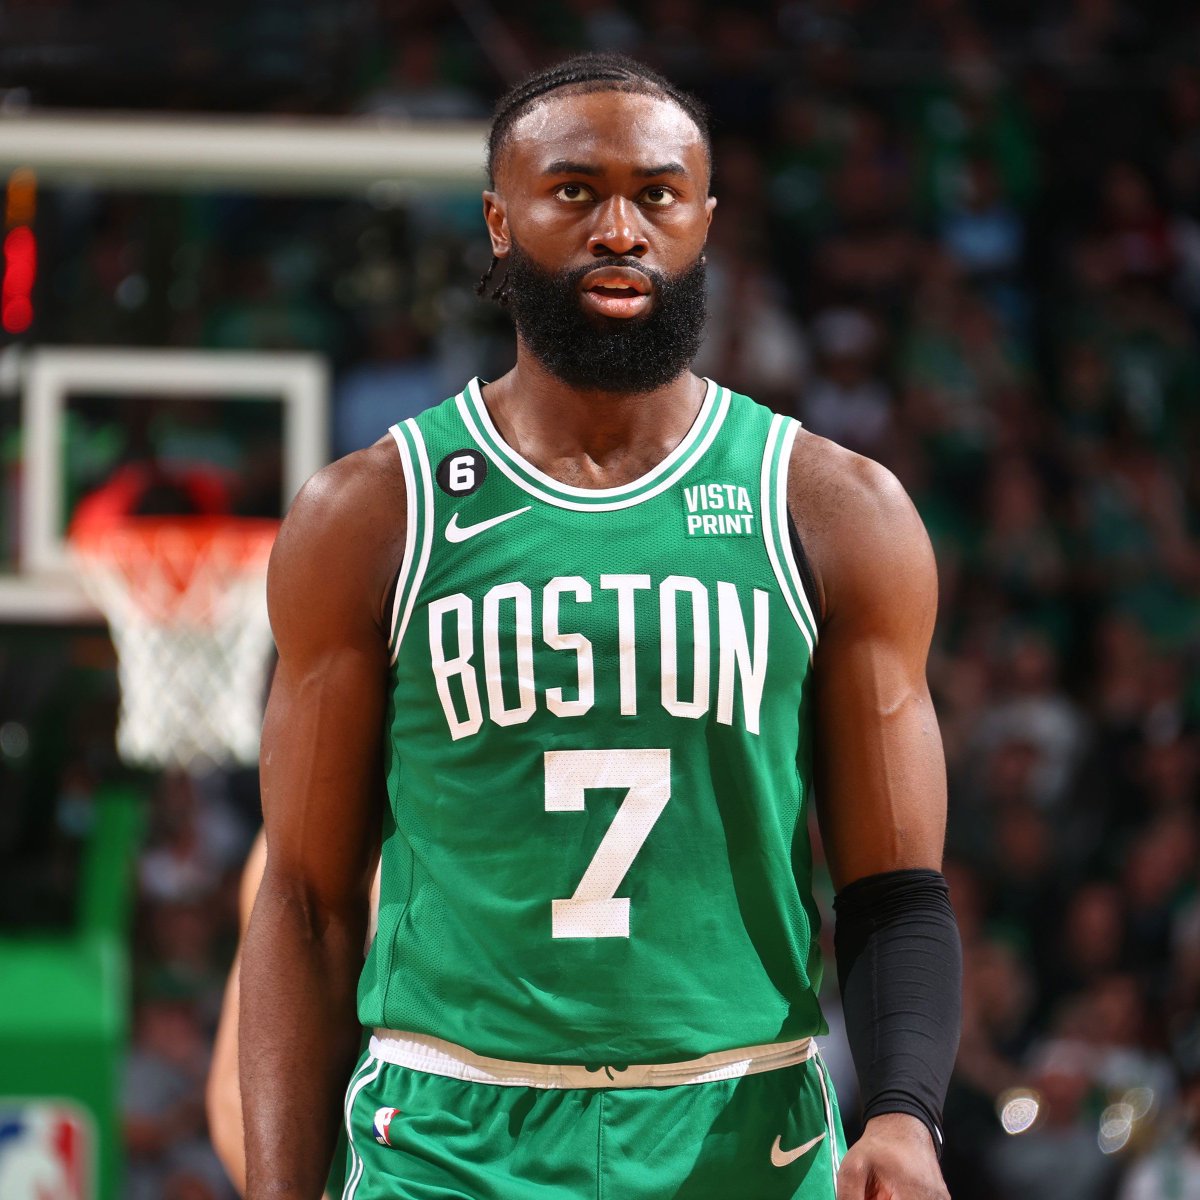 Jaylen Brown on what he told the Celtics before Game 3: “We're not here to play around. We didn't come to Cleveland for the weather.” (via @CelticsCLNS)